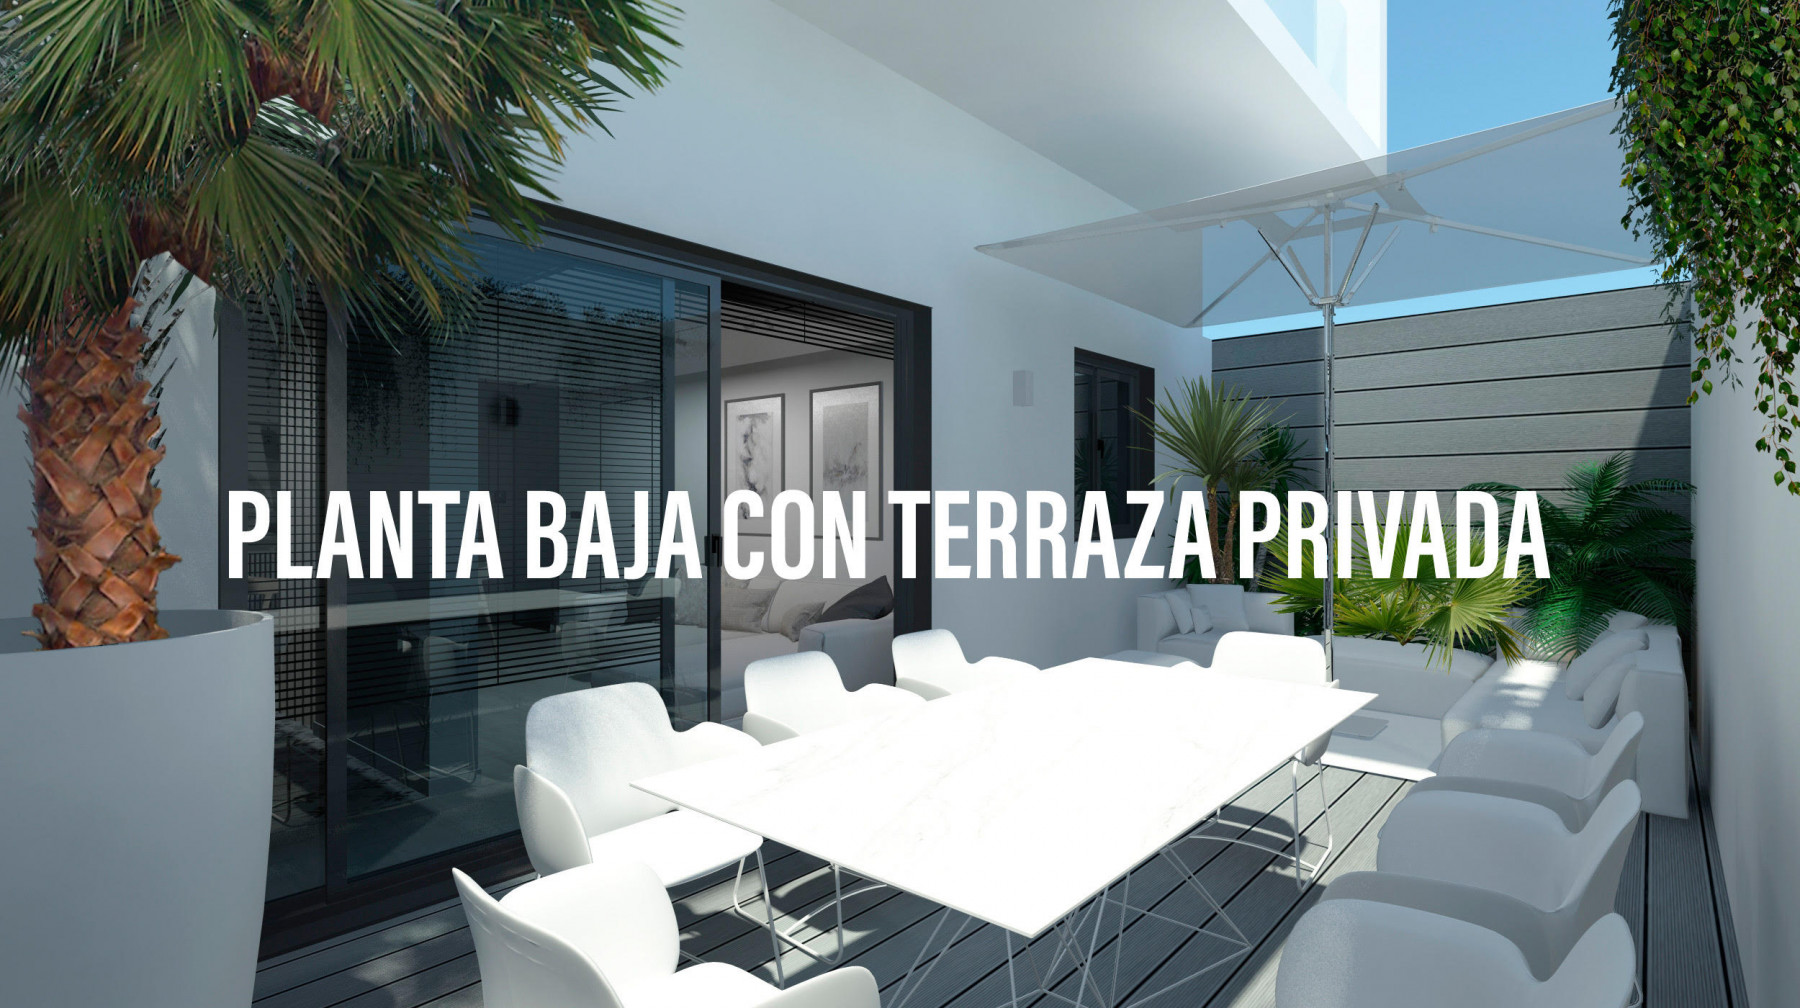 DESIGN APARTMENTS AND NEW CONSTRUCTION WITH SWIMMING POOL IN SANT BOI, BARCELONA